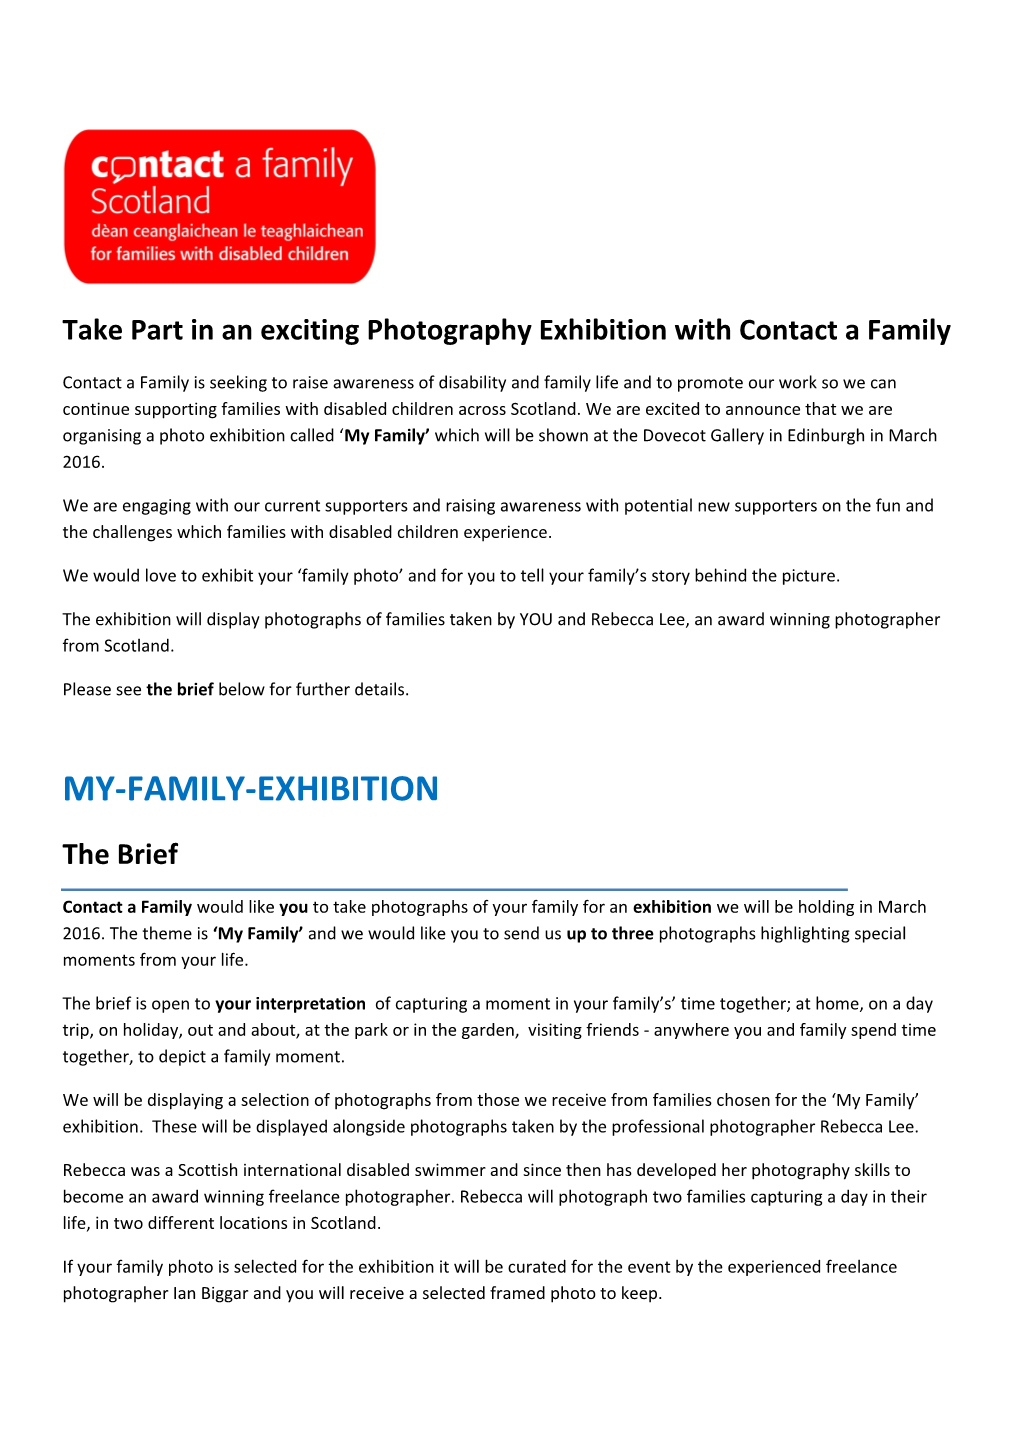 Take Part in an Exciting Photography Exhibitionwith Contact a Family